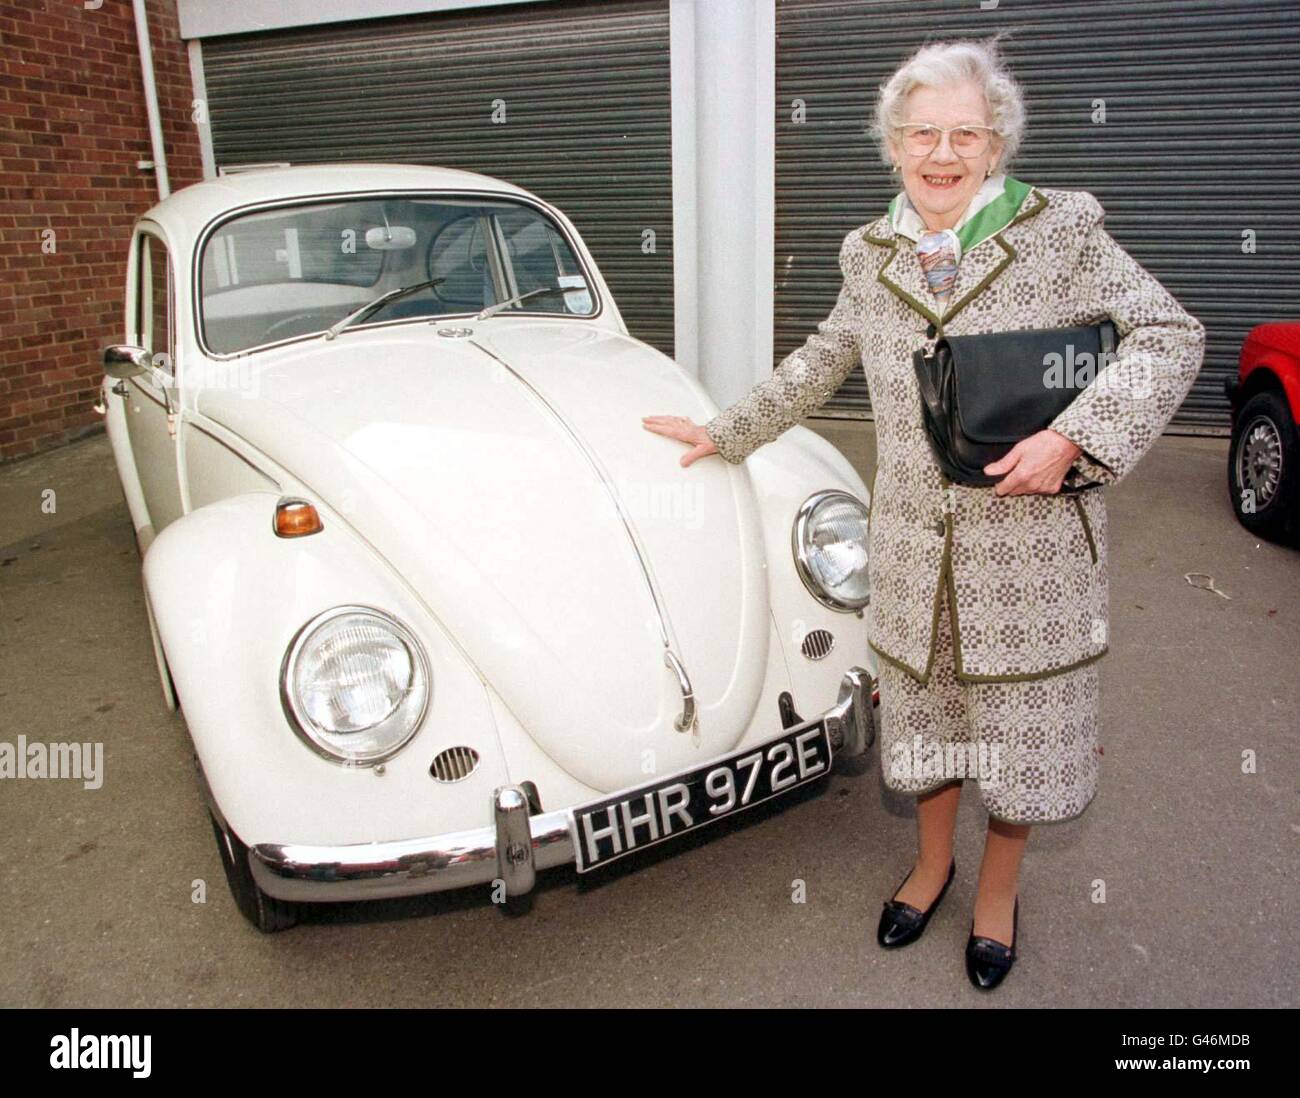 Miss Phyllis Harding, 80, with her 30-year-old Volkswagen Beetle at Woolley & Wallis Auctioneers, Salisbury, today (Wednesday) where she sold the vehicle for 9500. The car, a 1300 de luxe model which she brought from new in February 1967, has only 3485 miles on the clock. Photo by Tim Ockenden/PA. Stock Photo